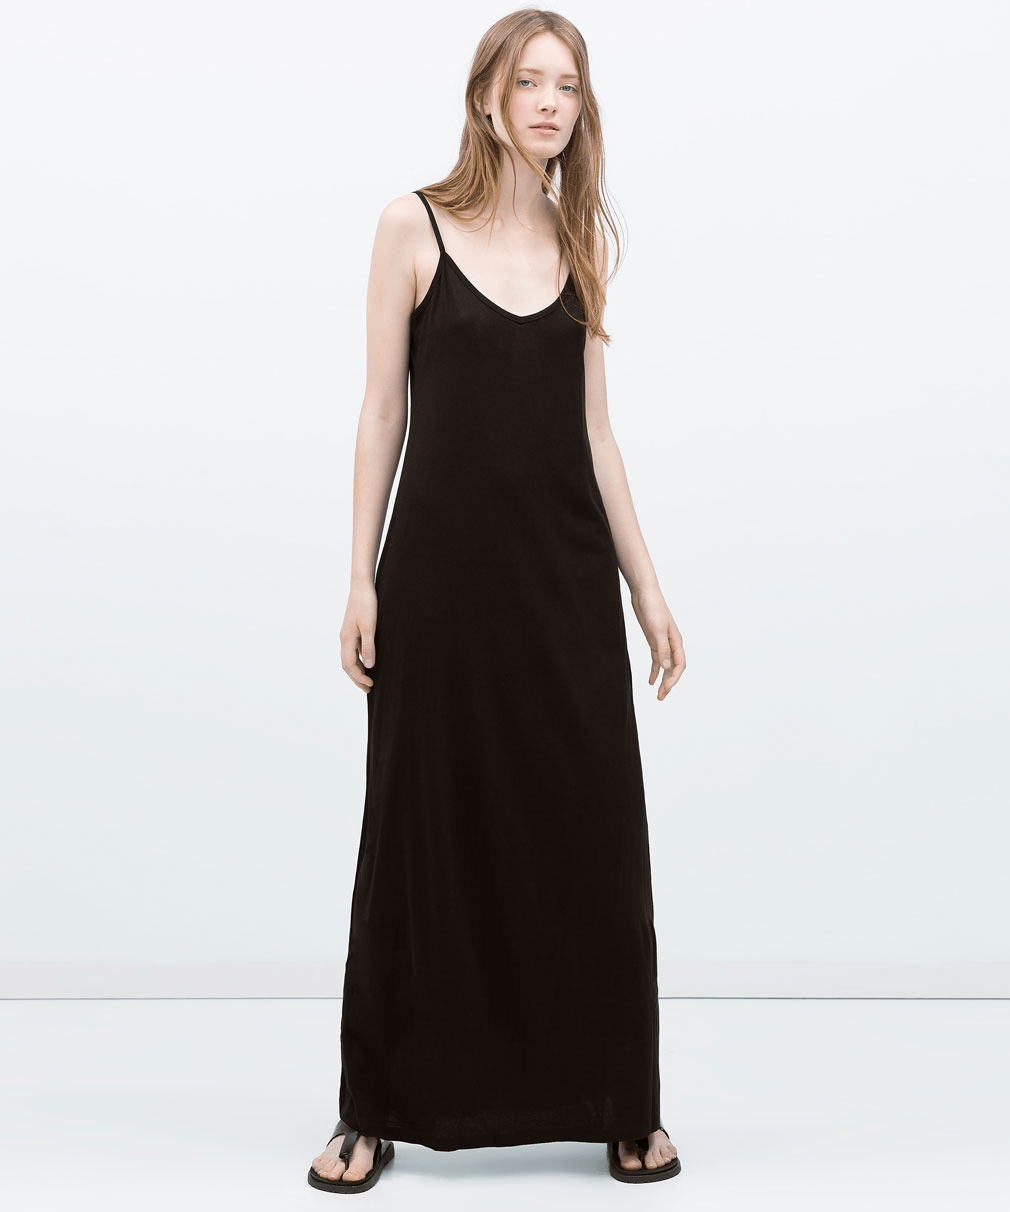 Zara Canada Offers: Summer Dresses Starting From $19.90 - Canadian ...